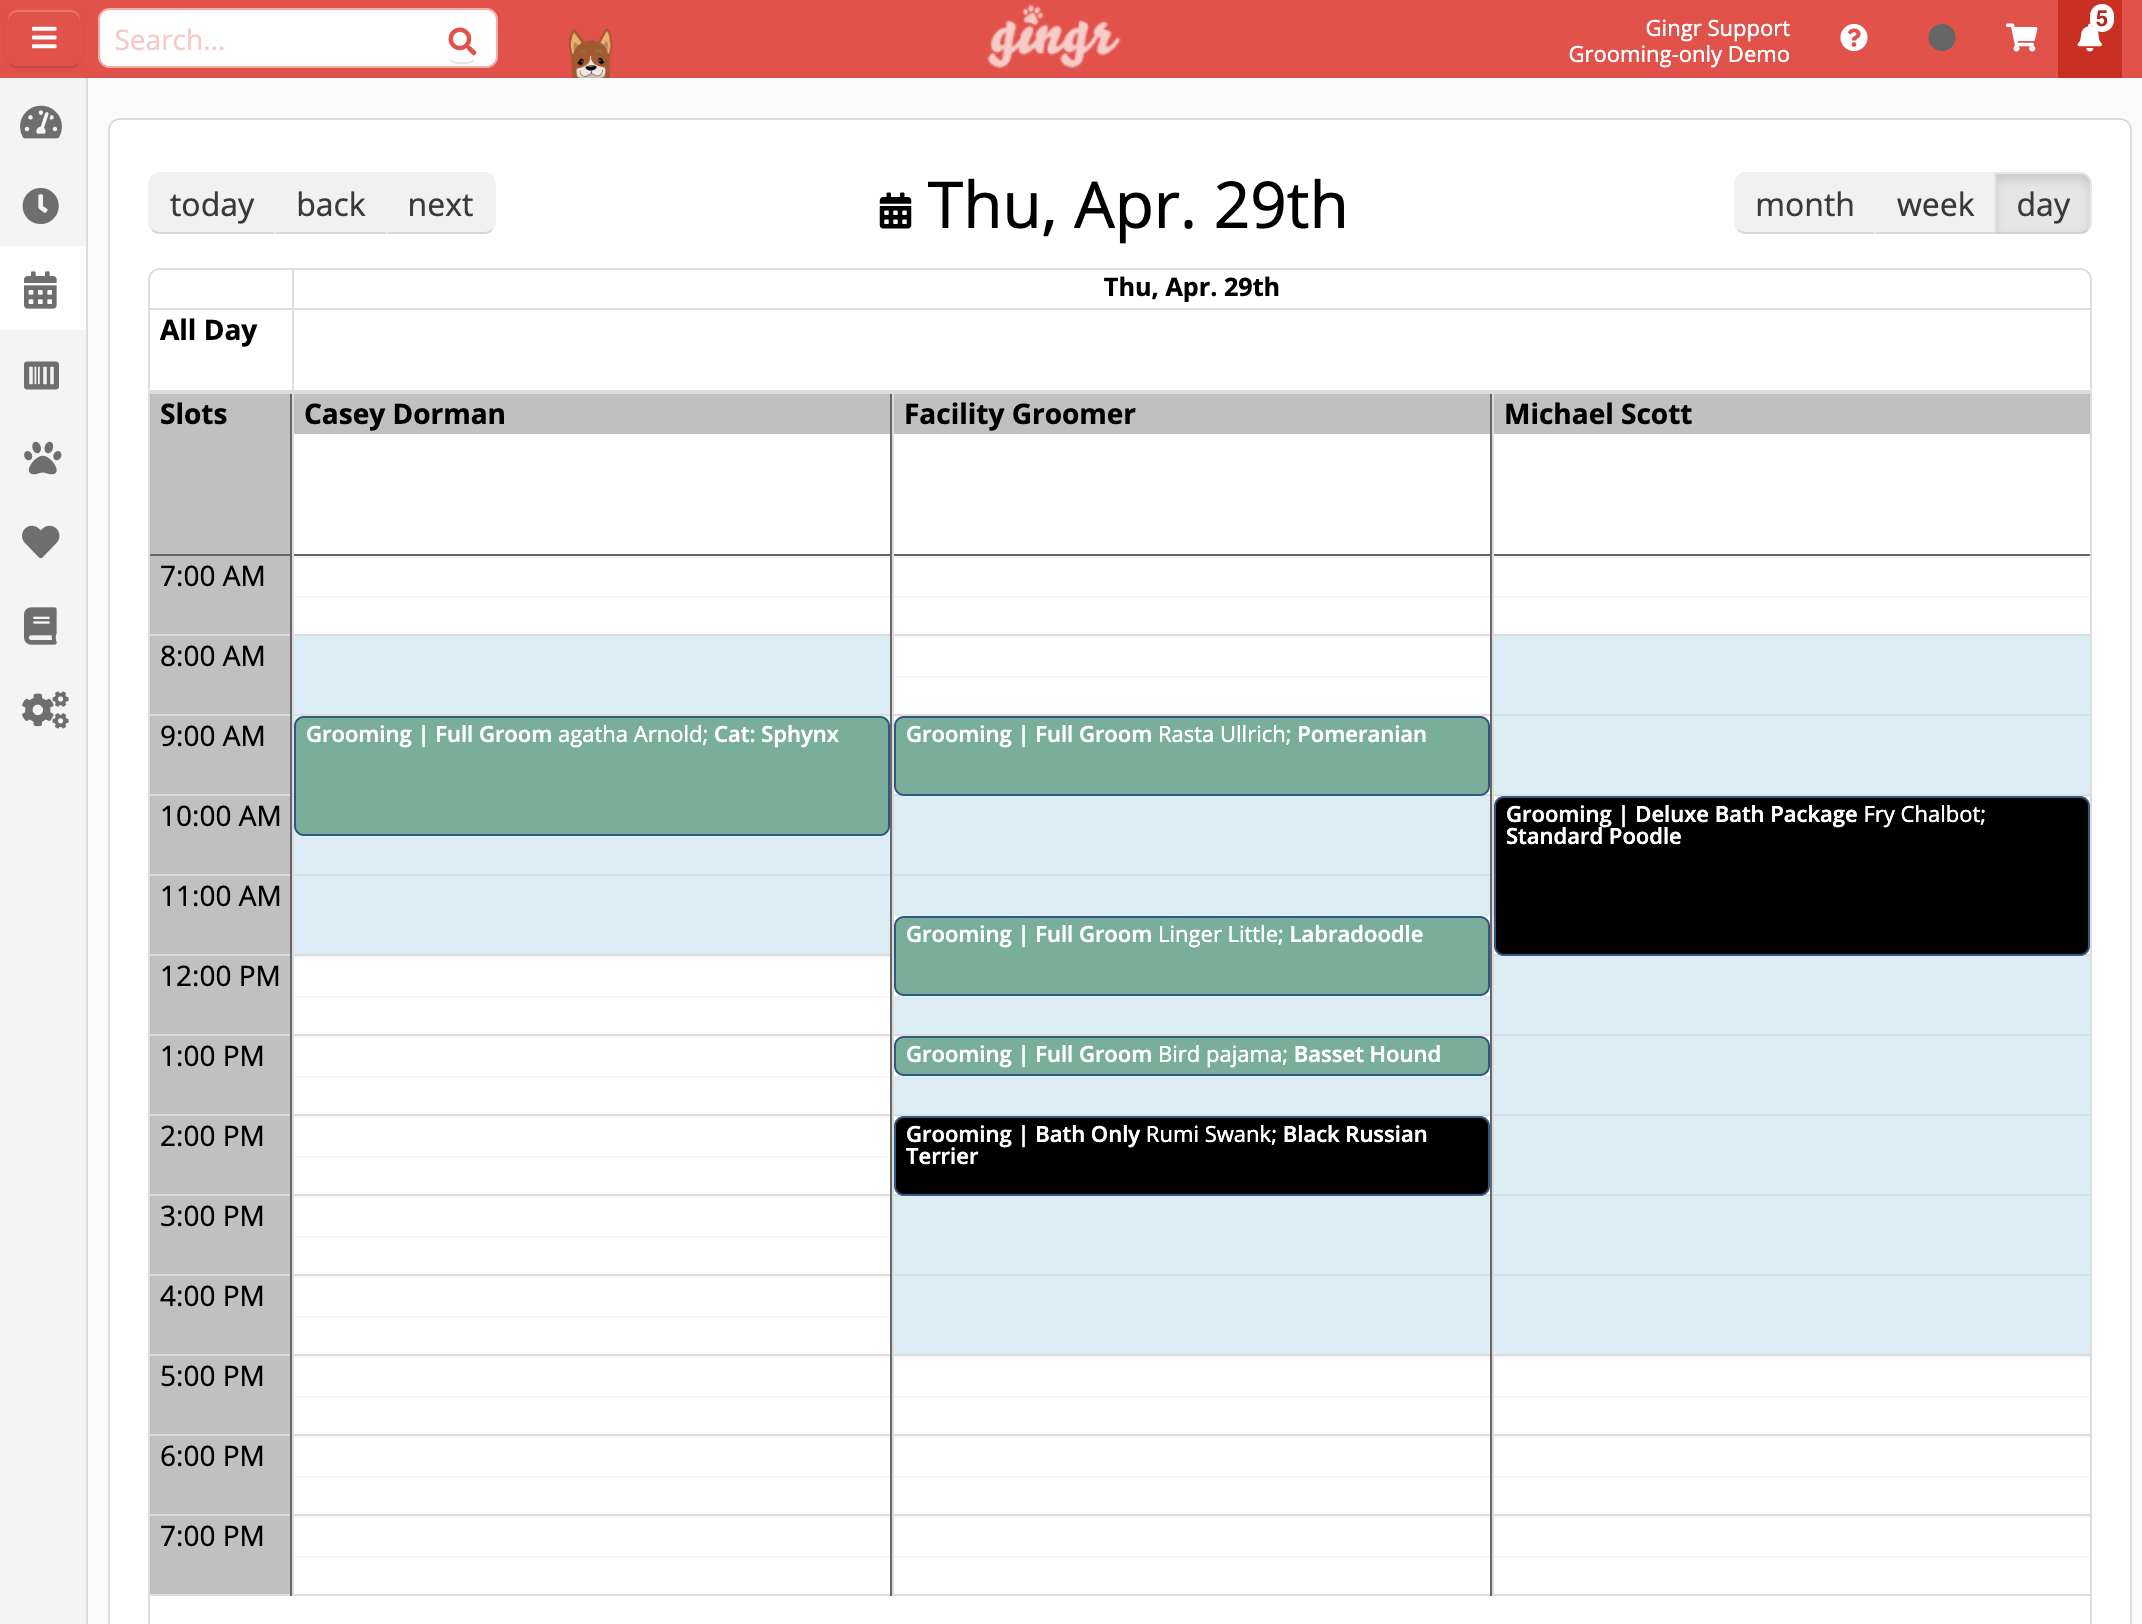 Take a look at Gingr's scheduling feature.